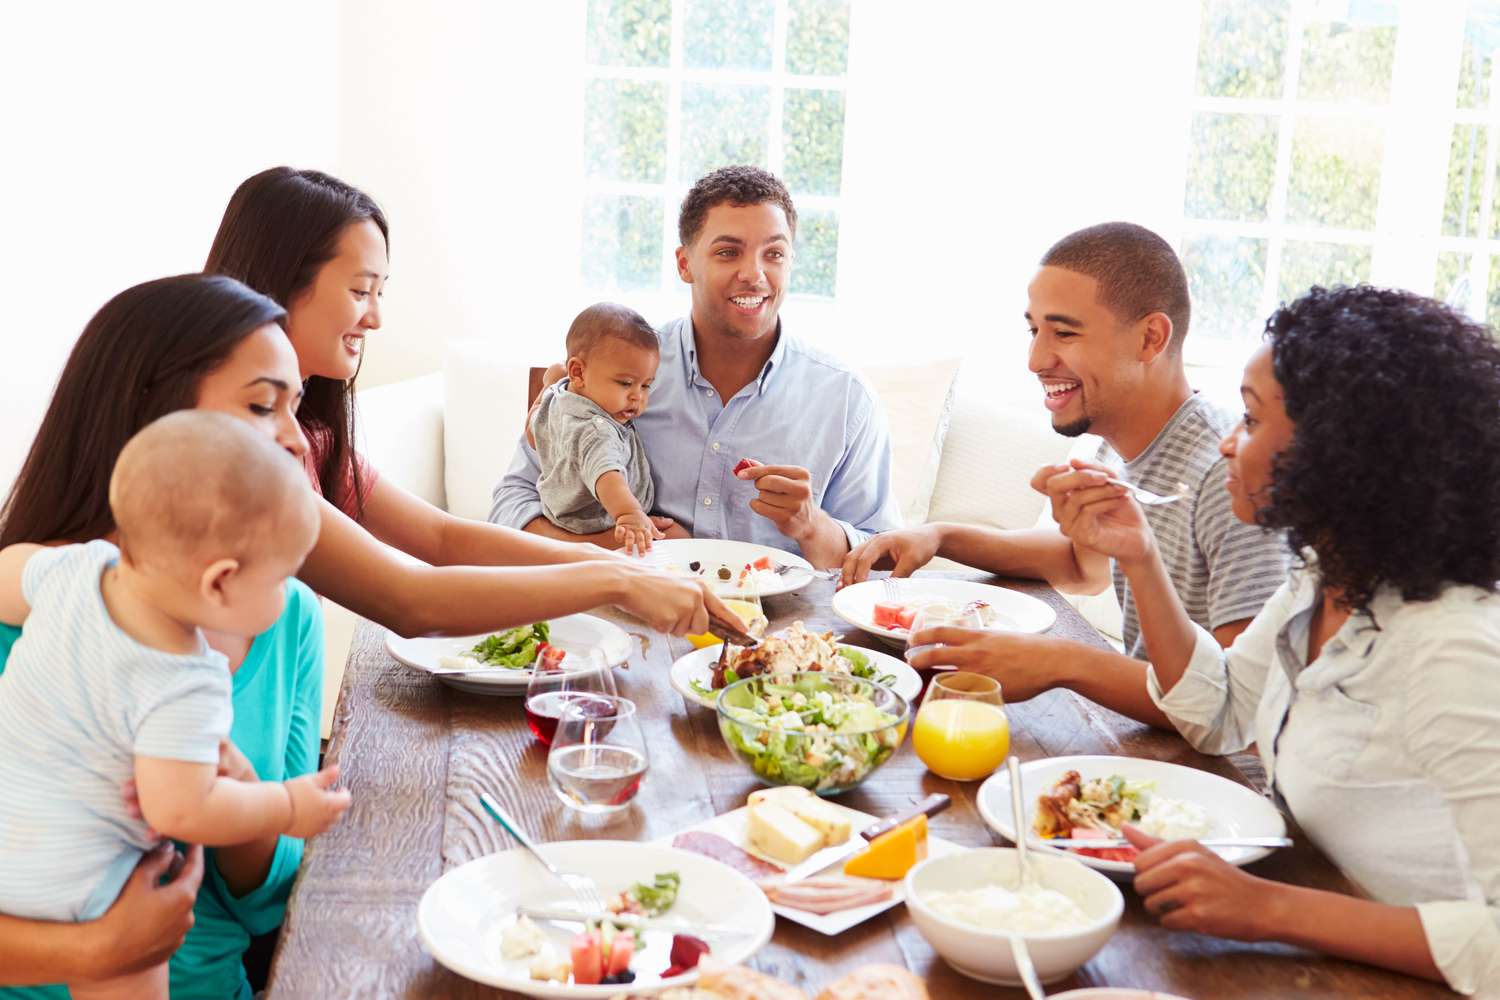 7 Unexpected Benefits of Eating Together as a Family, According to